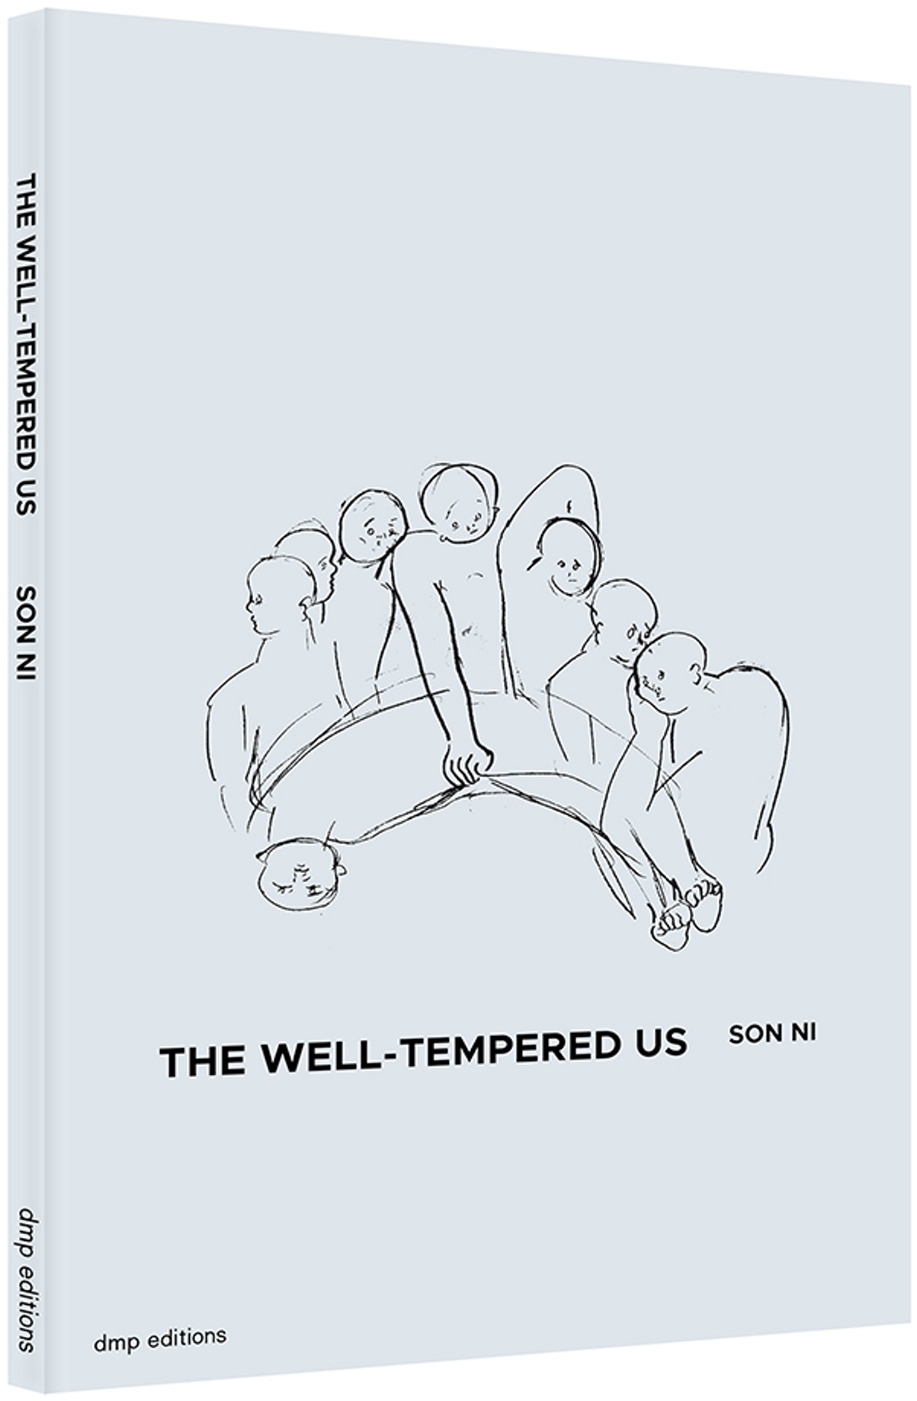 The Well-Tempered Us